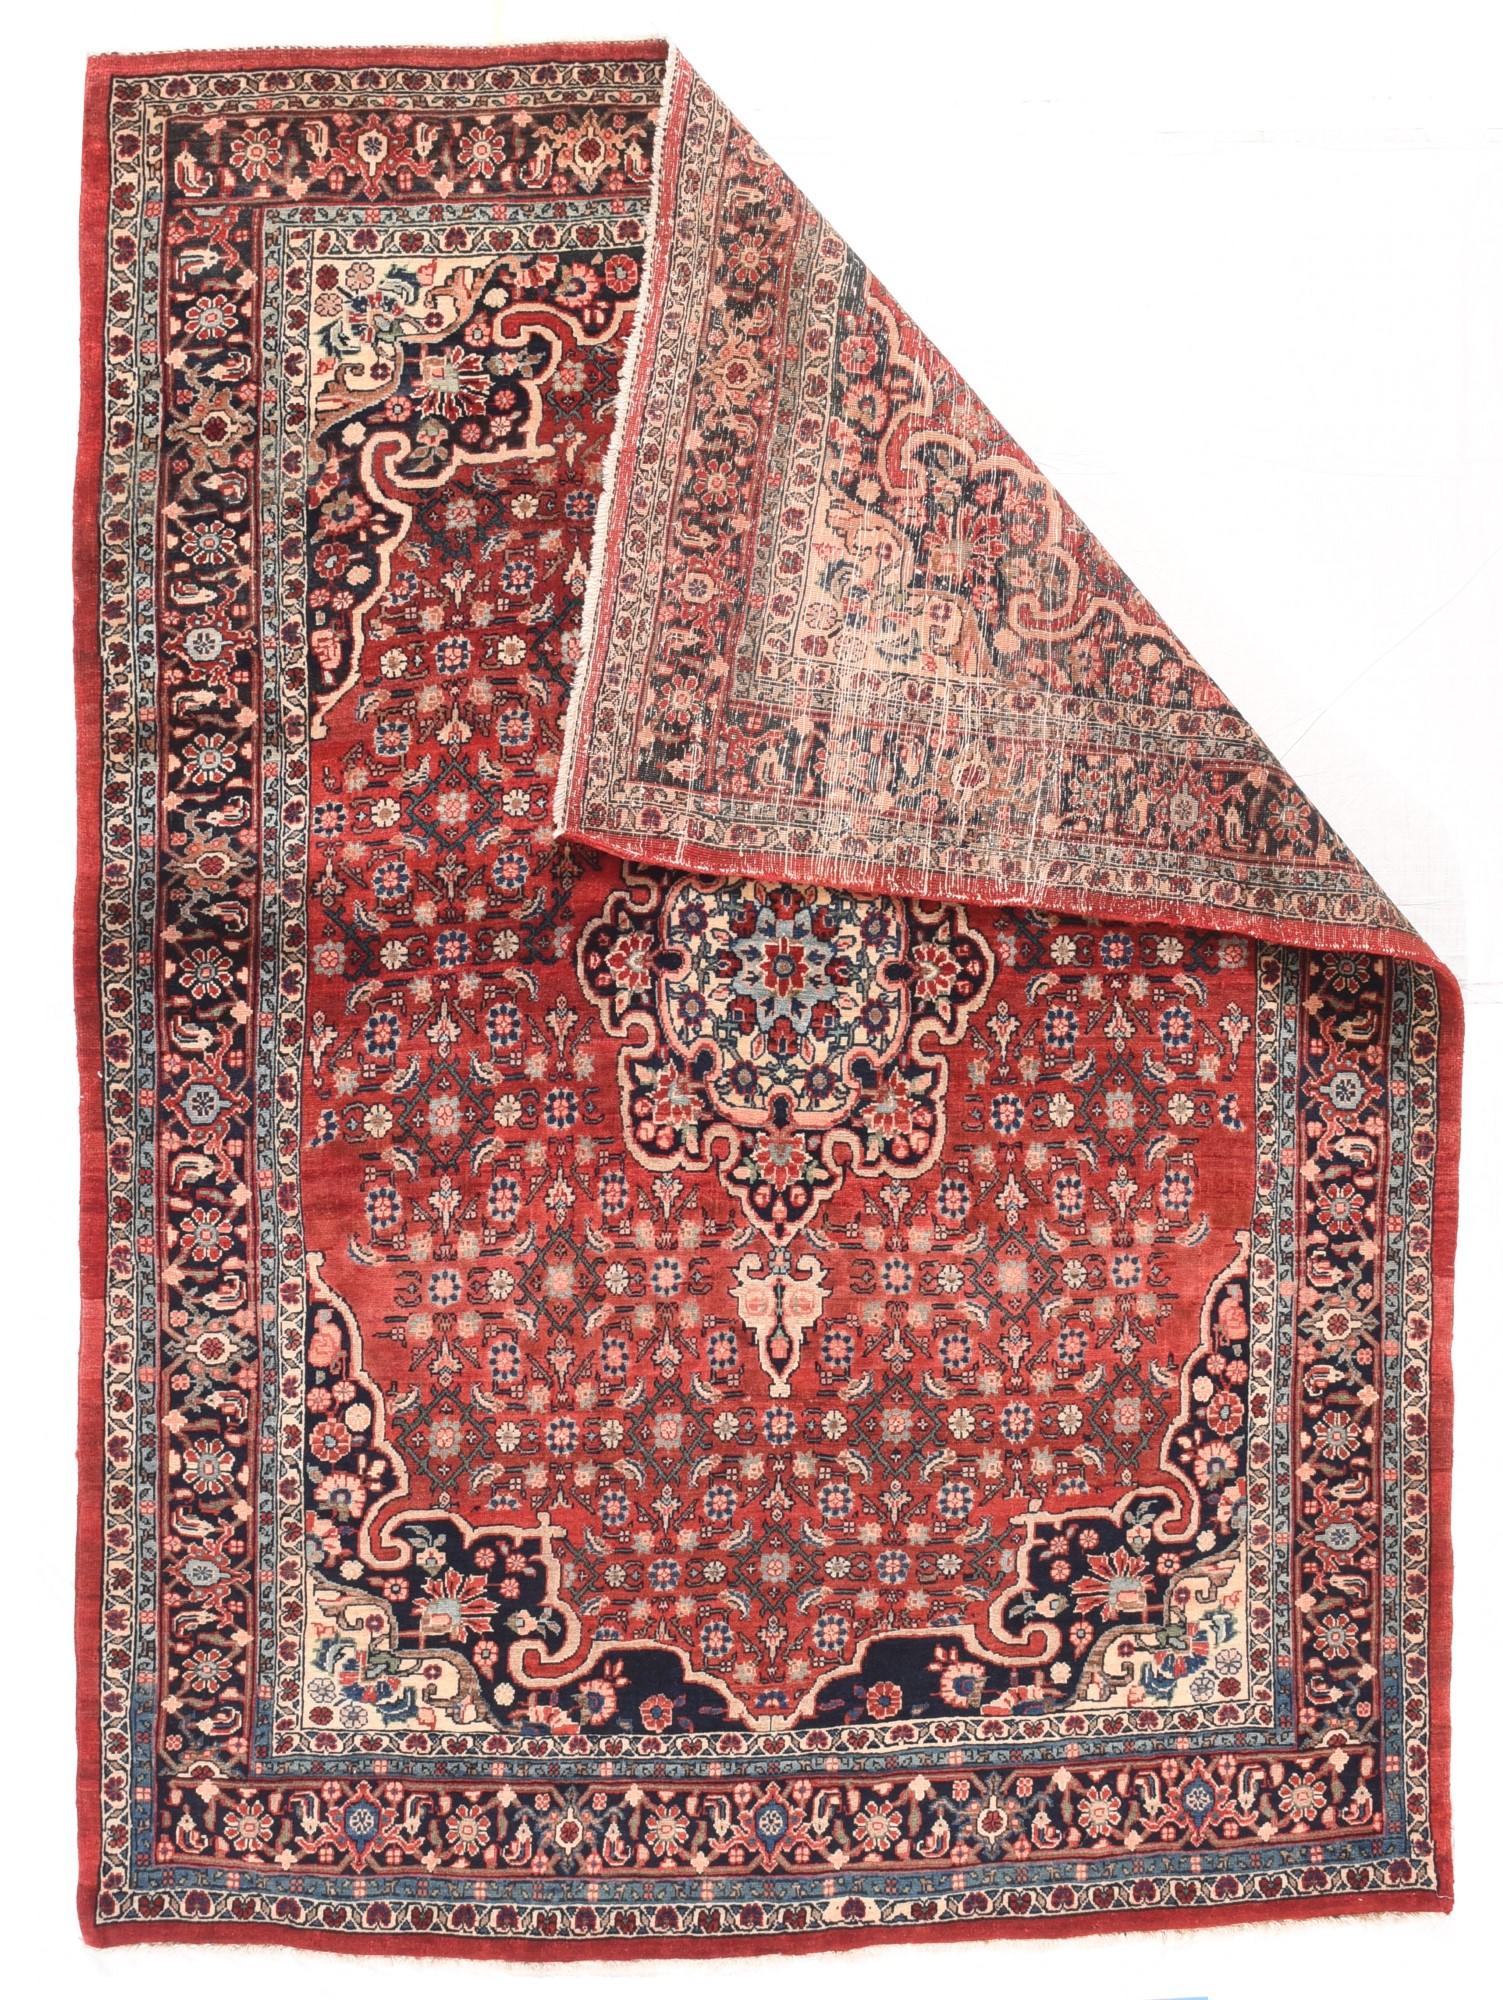 Antique Bidjar rug 4'10'' x 6'6''. The gently abrashed tomato Madder field shows a small Herati design flowing around a navy eight crenel medallion with an ecru sub-medallion. Conjoint navy corners show arabesque points and hooks from the field.